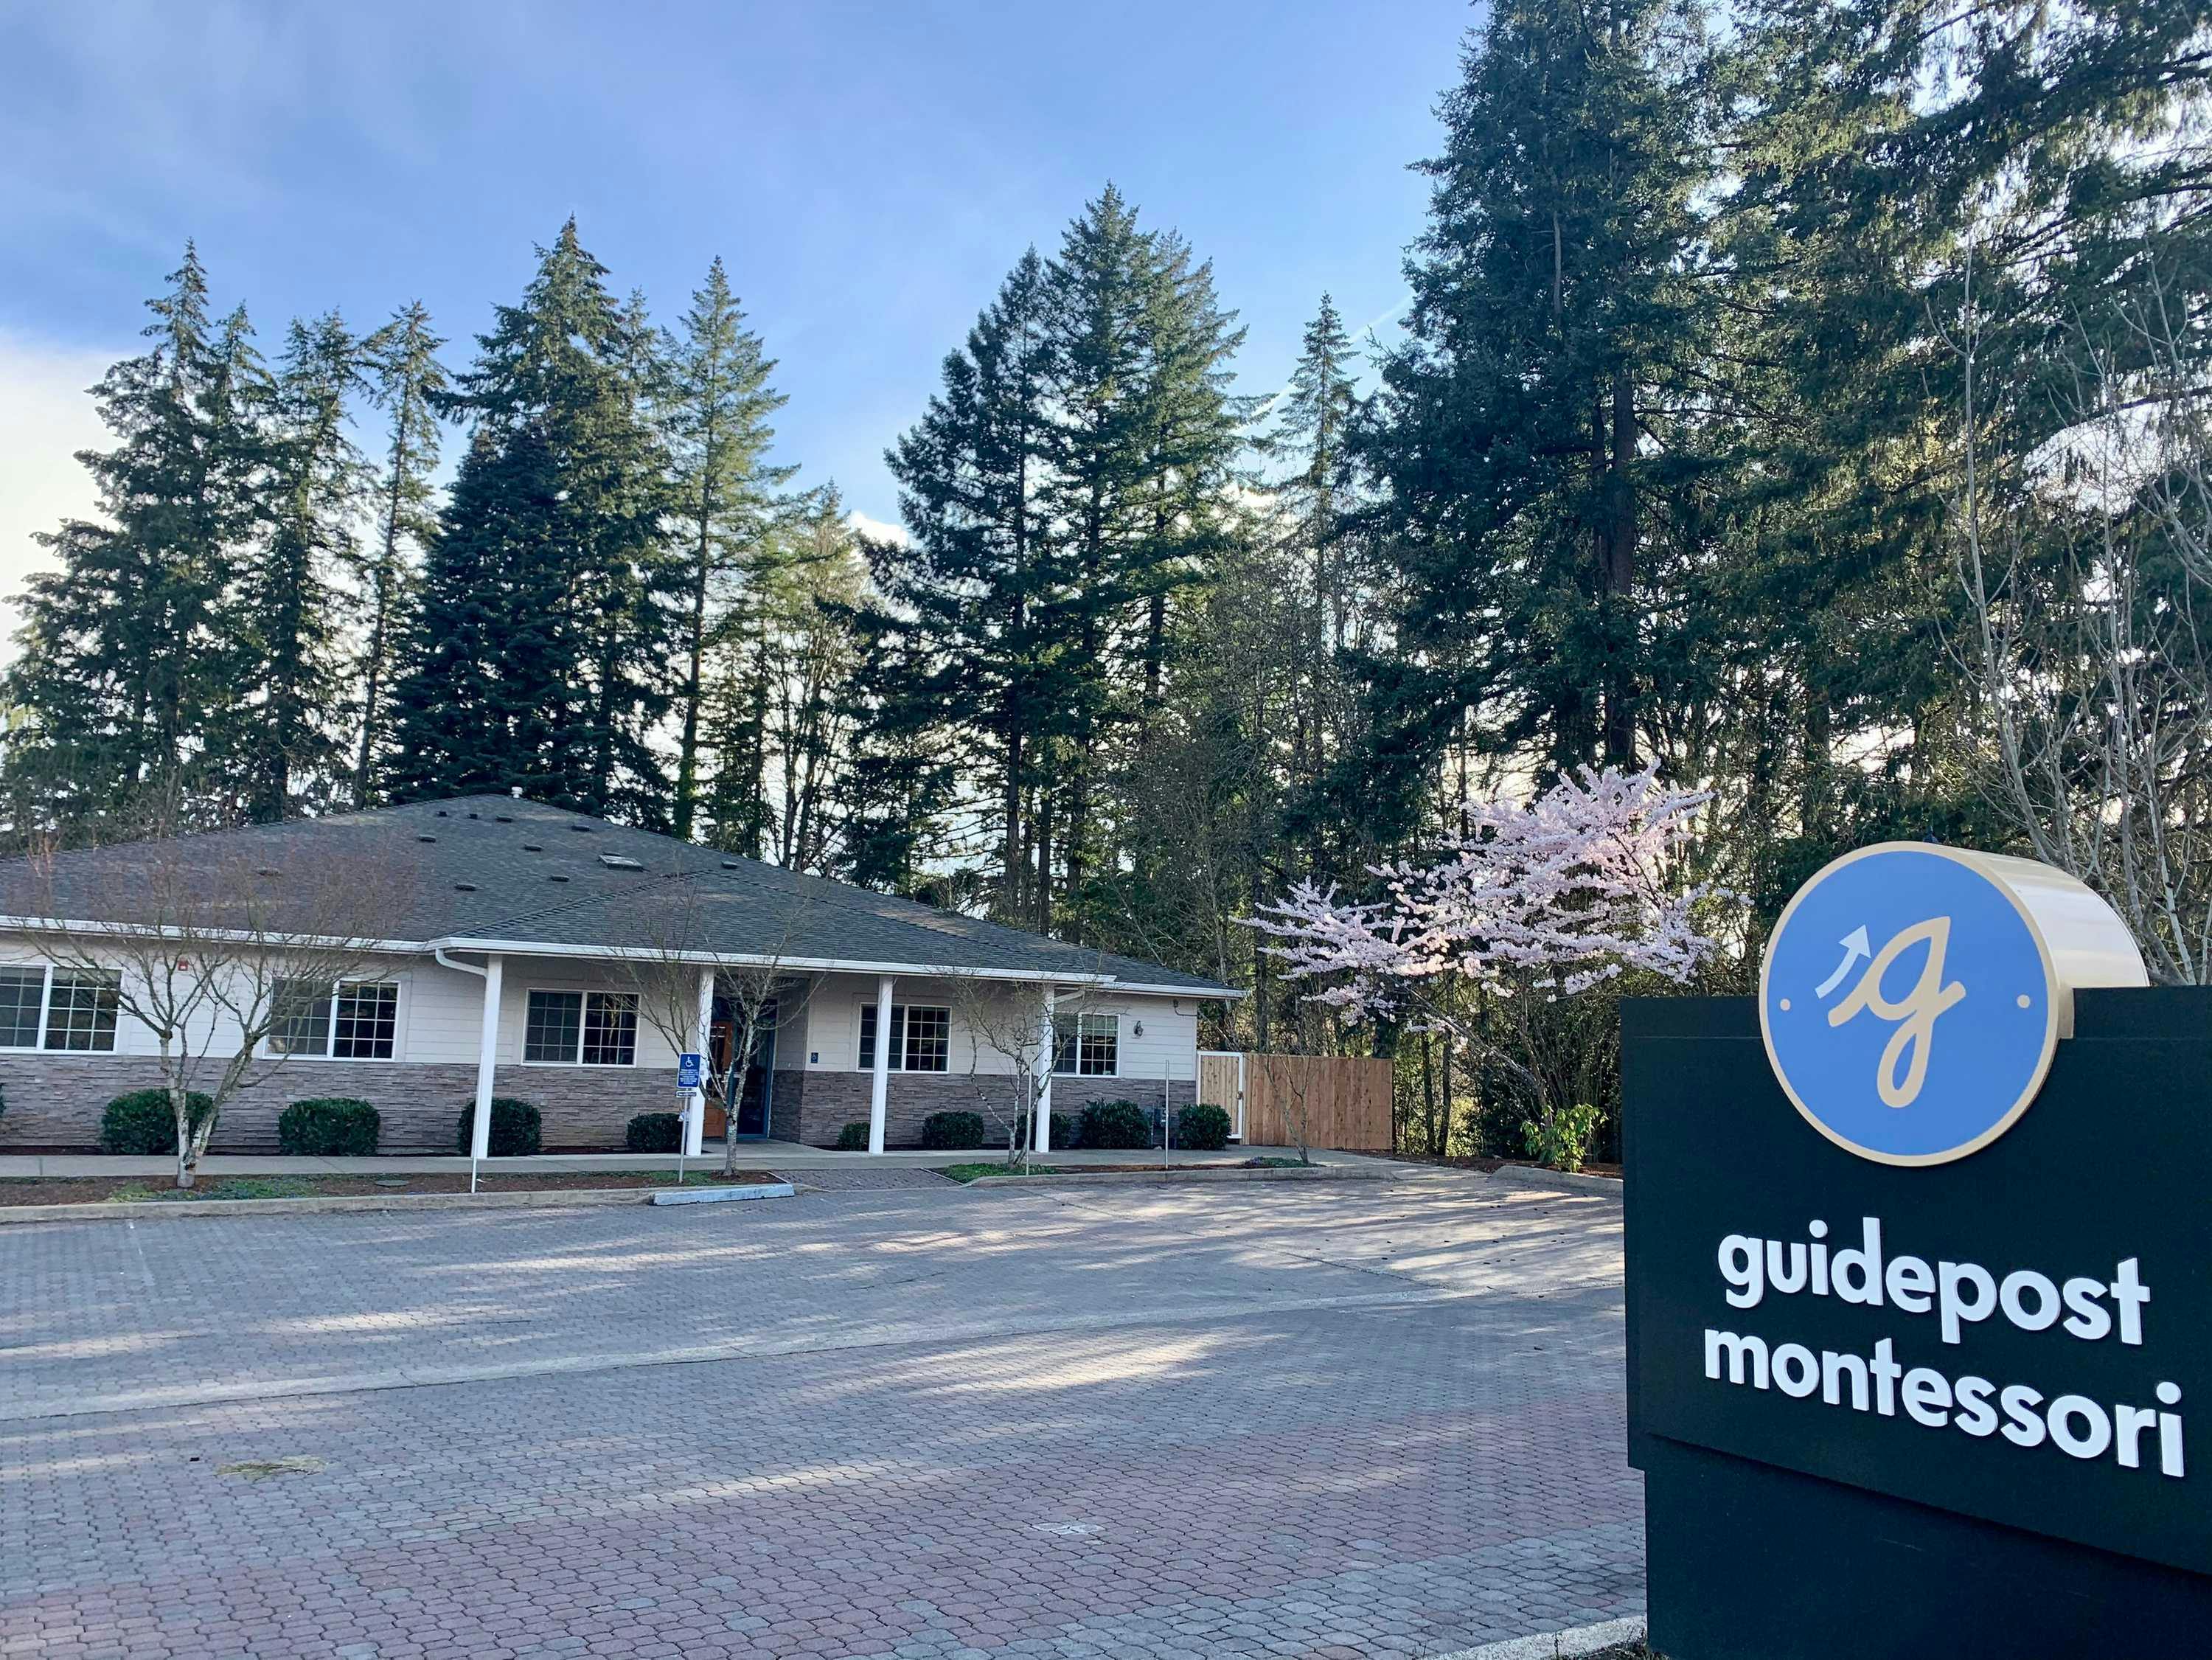 View of Guidepost Montessori at South Beaverton that shows the brick inlaid parking lot and a street-facing branded Guidepost Montessori sign. There are a lot of tall trees in the background, some smaller trees in the parking lot and one of them is blossoming pink flowers.